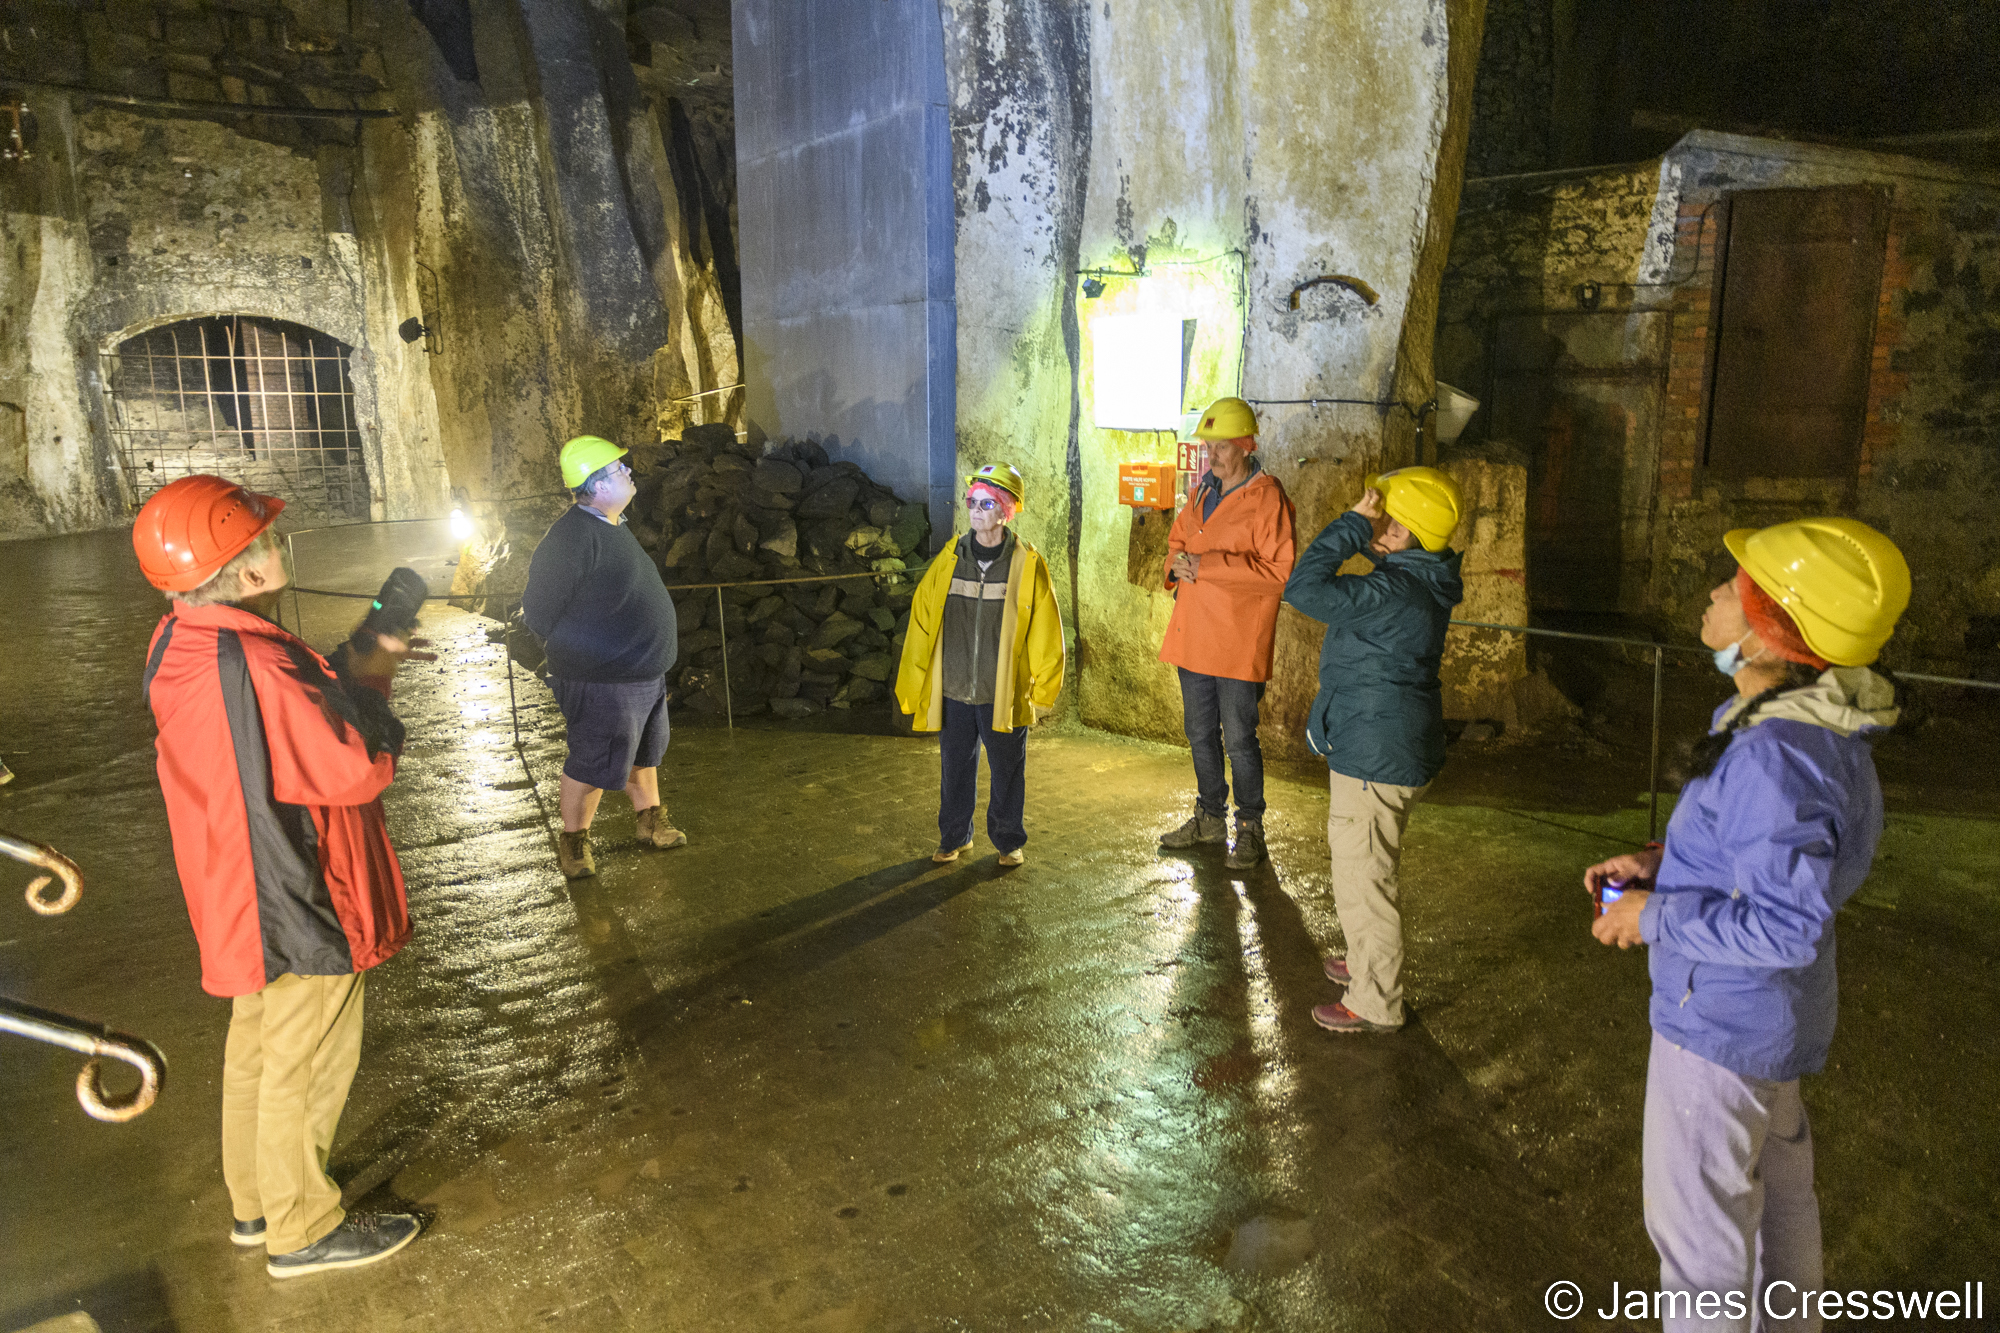 People on a tour in an underground cellar